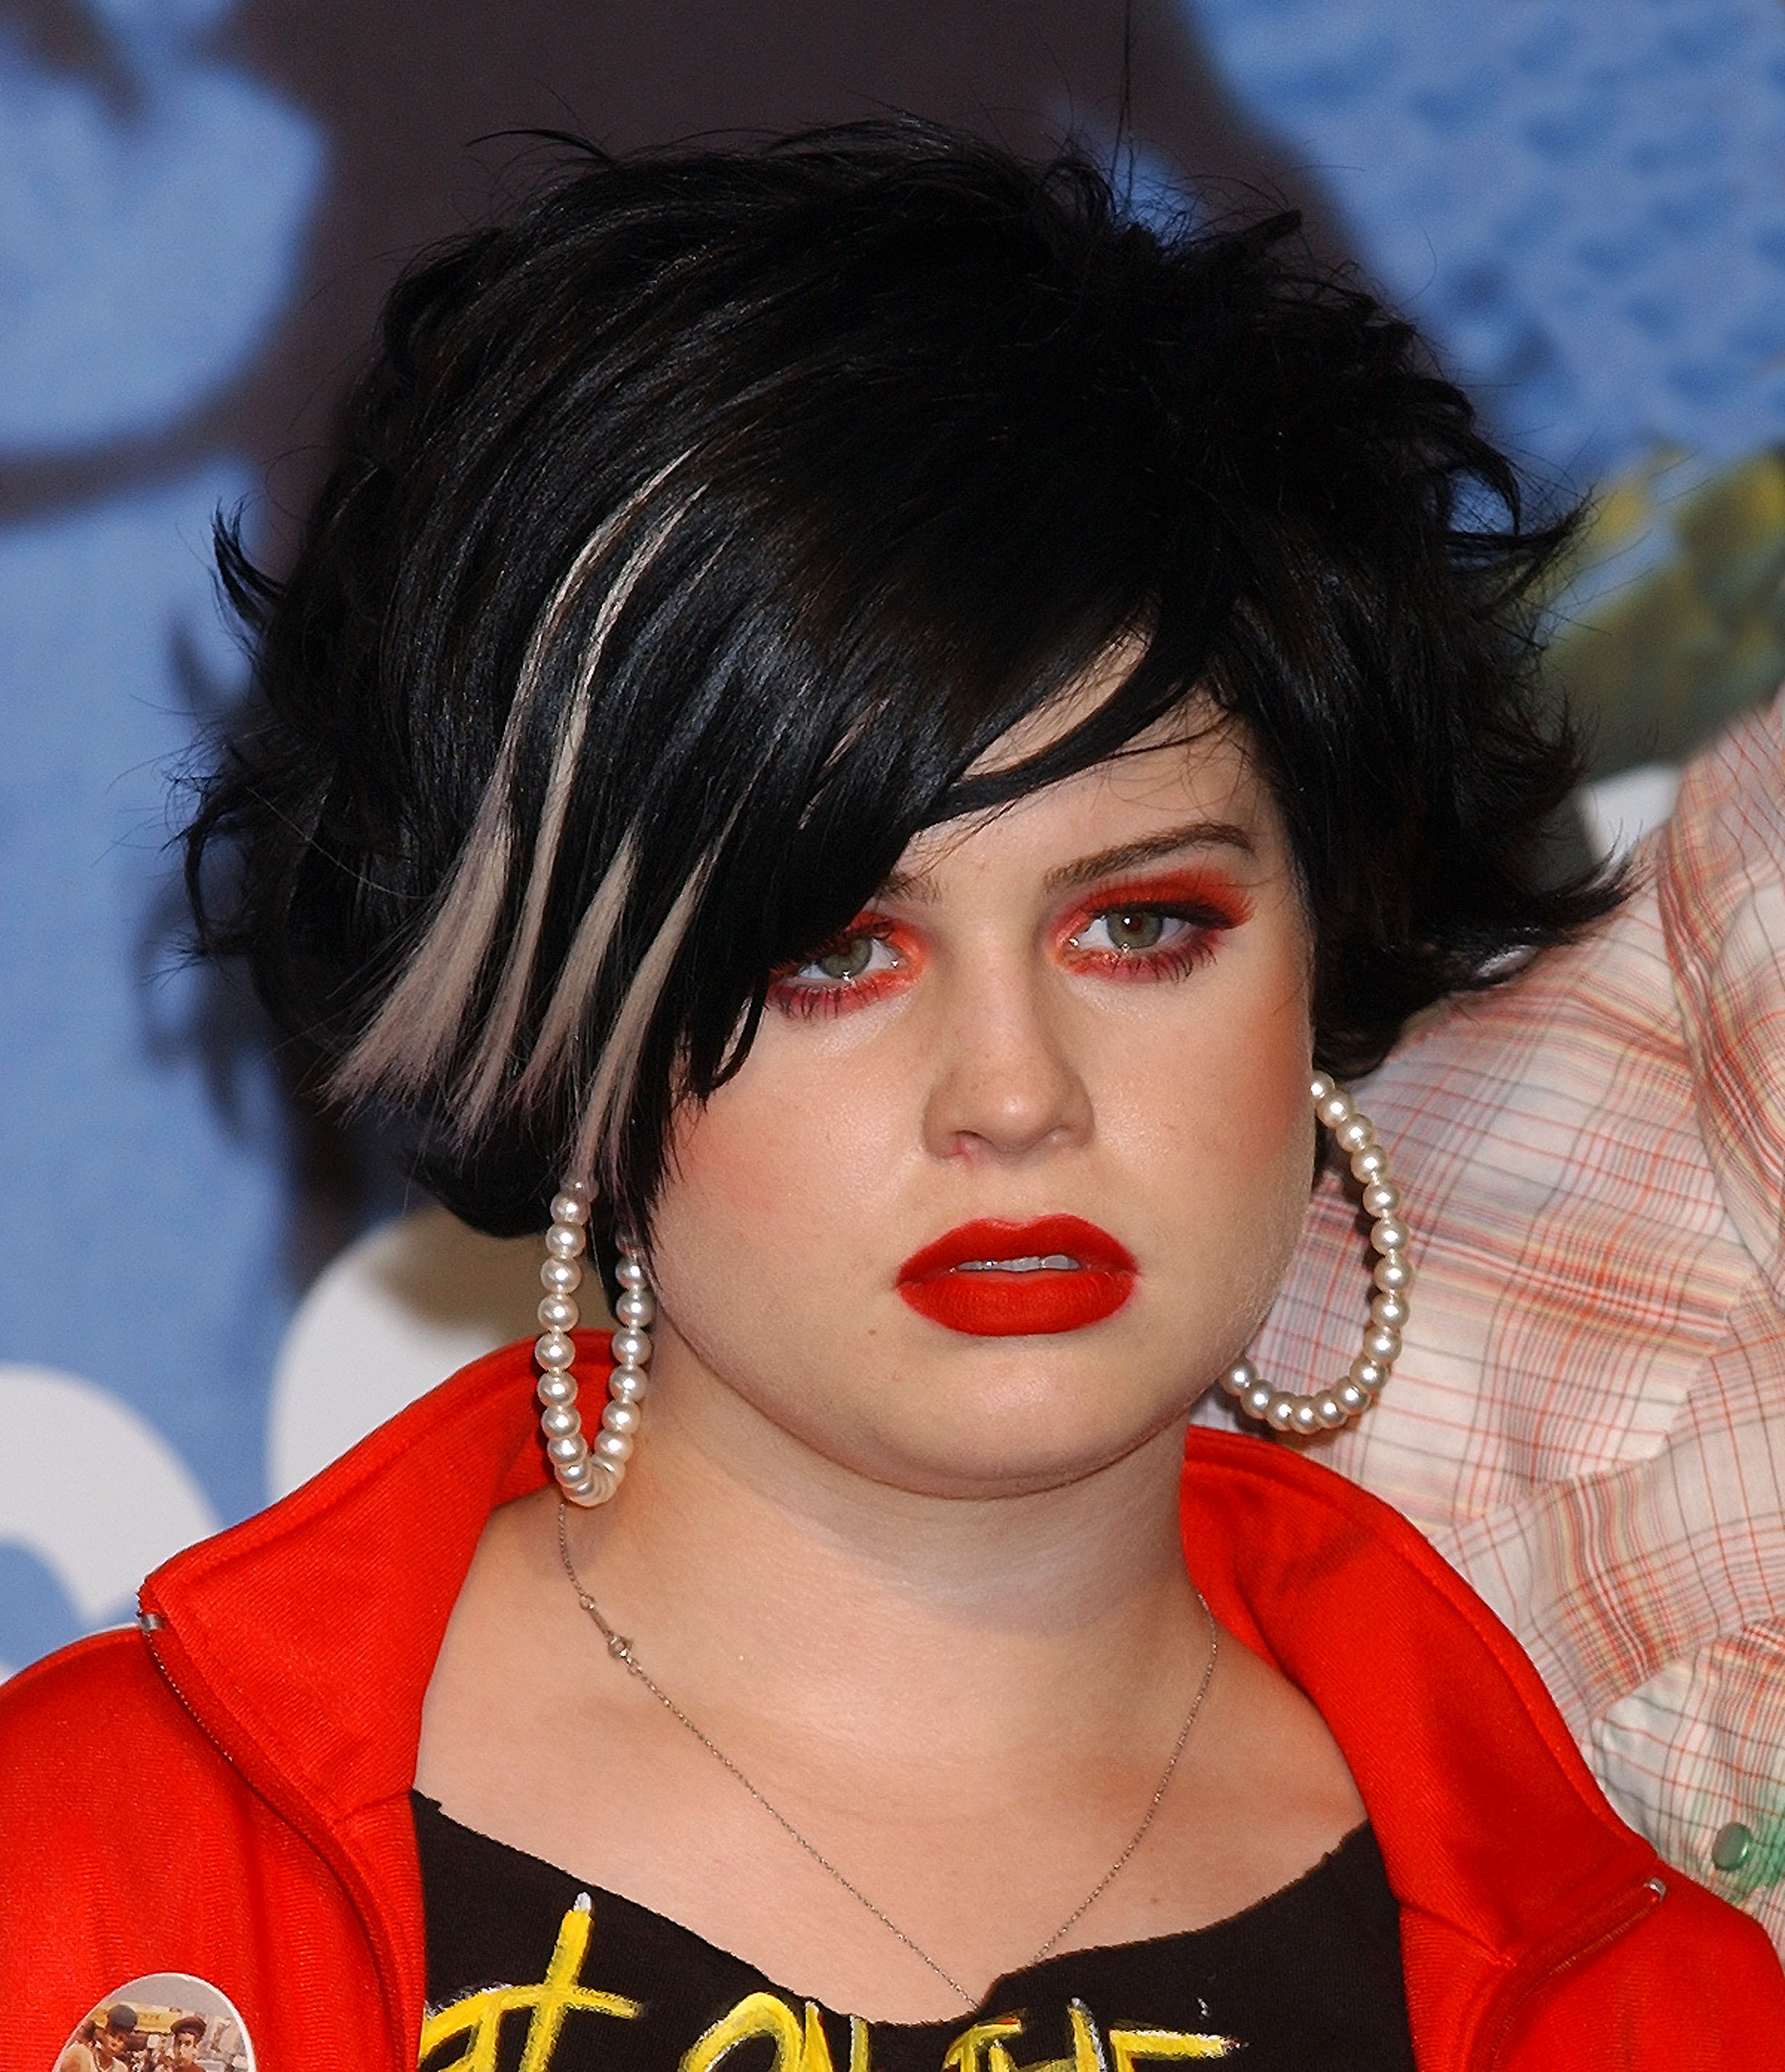 Kelly Osbourne during The 2002 Teen Choice Awards at Universal Amphitheater in Universal City, California in August 4, 2002. | Source: Getty Images